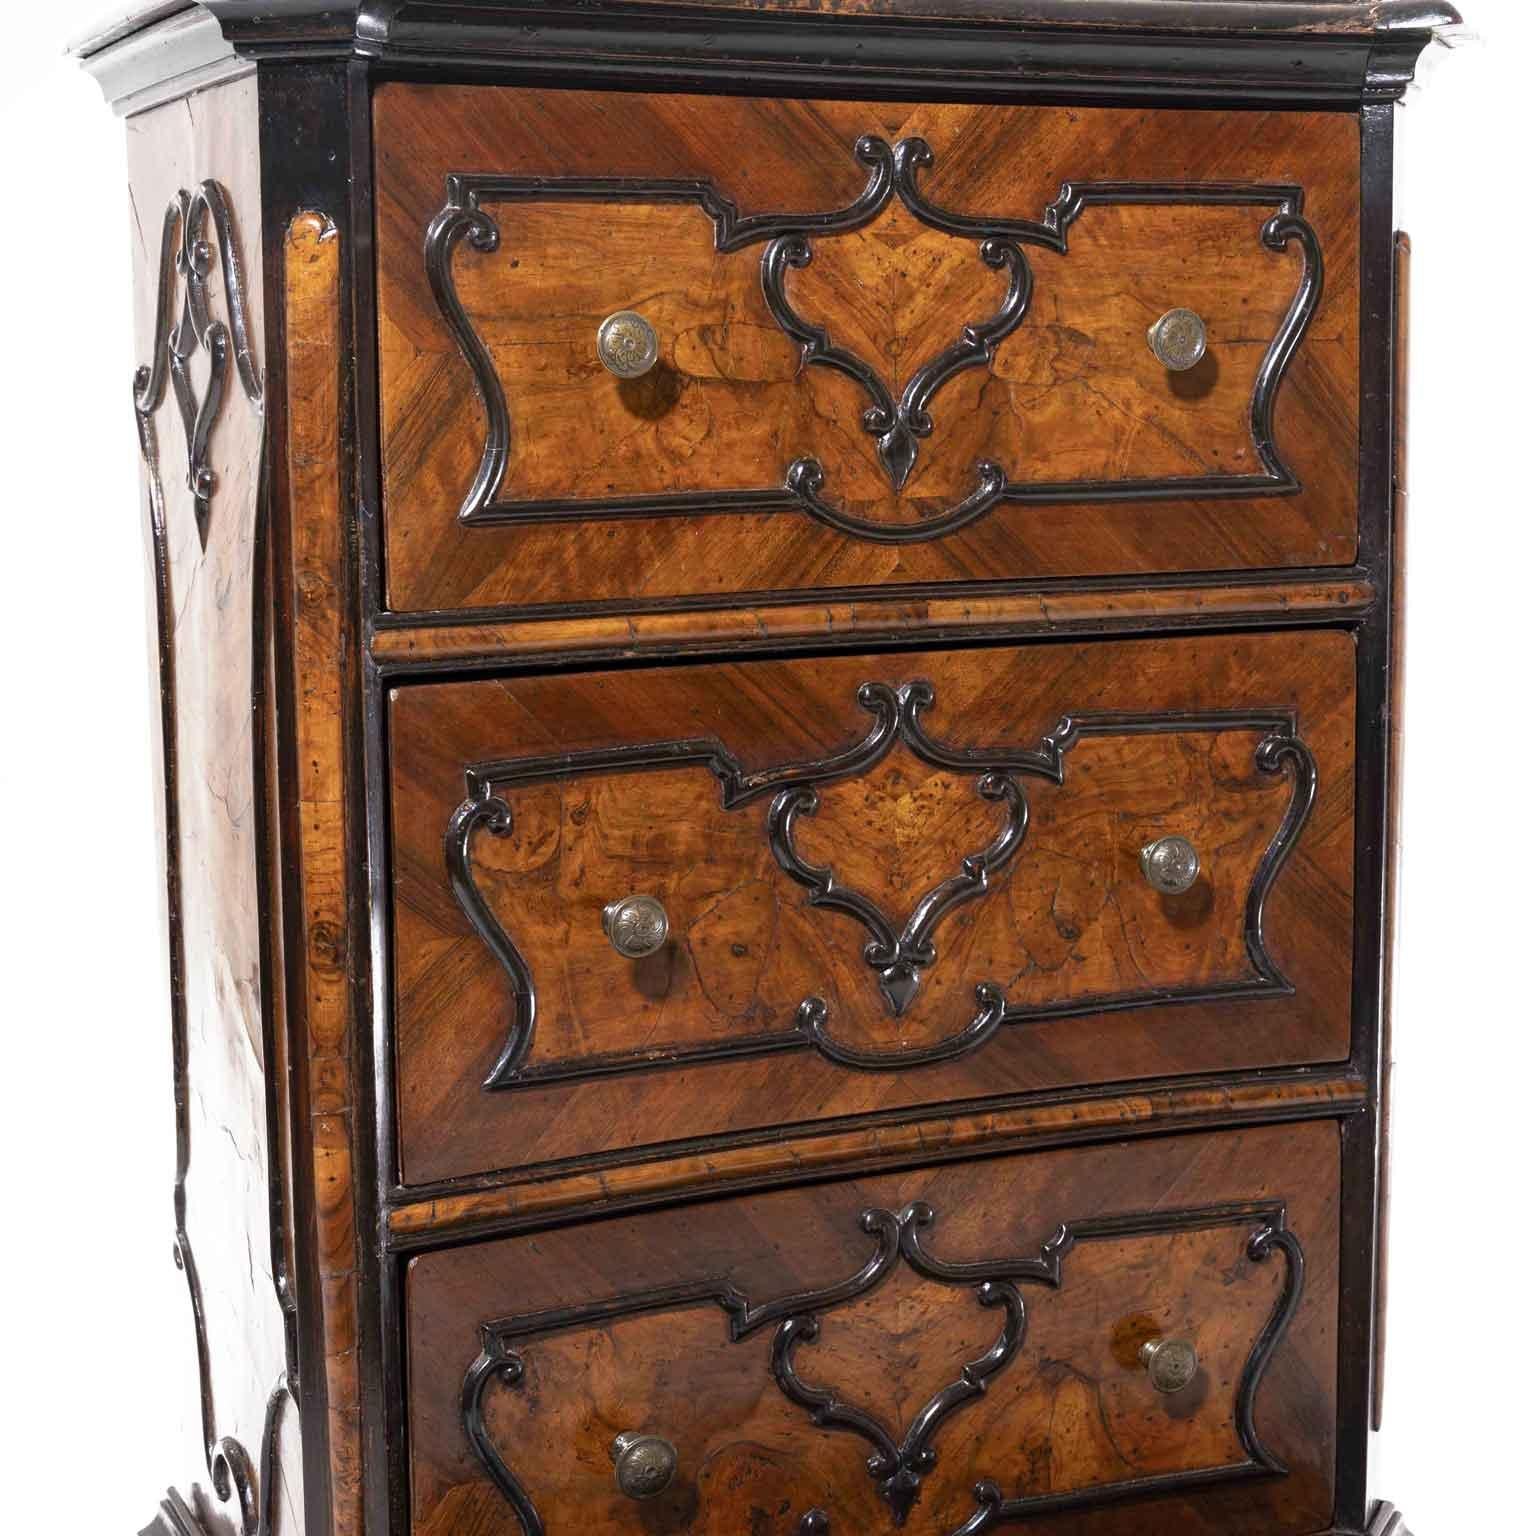 From Italy, Lombardy a rare burl walnut prayer kneeler faldstool, an Italian Louis XV prayer bench with three drawers and ebonized jutting frames, dating back to the early 1700.
Fantastic example of Lombard cabinet-making, this antique Italian prie-